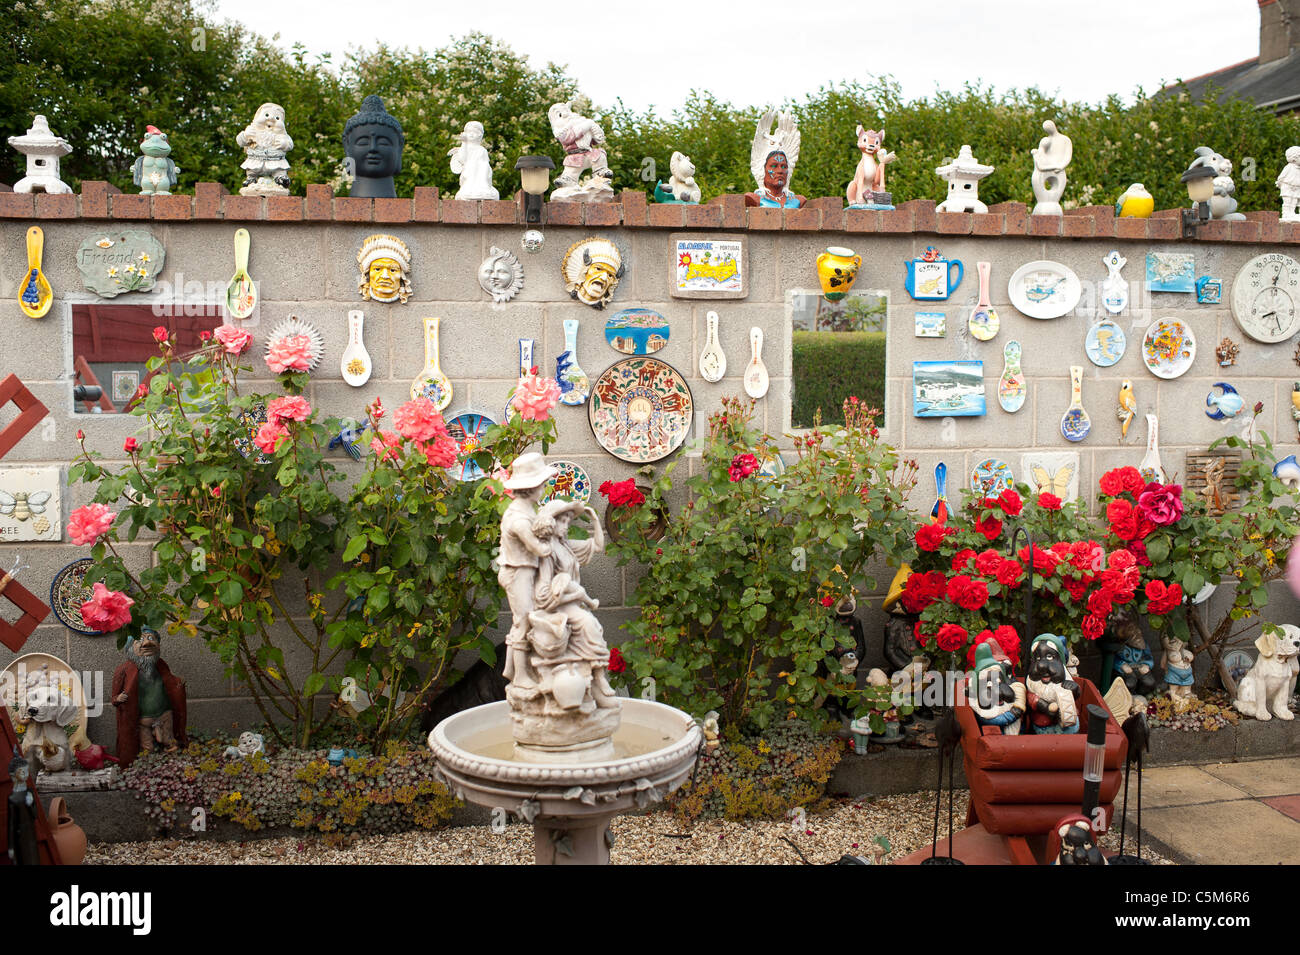 A patio garden or back yard full of plastic gnomes and other statues, Wales UK Stock Photo